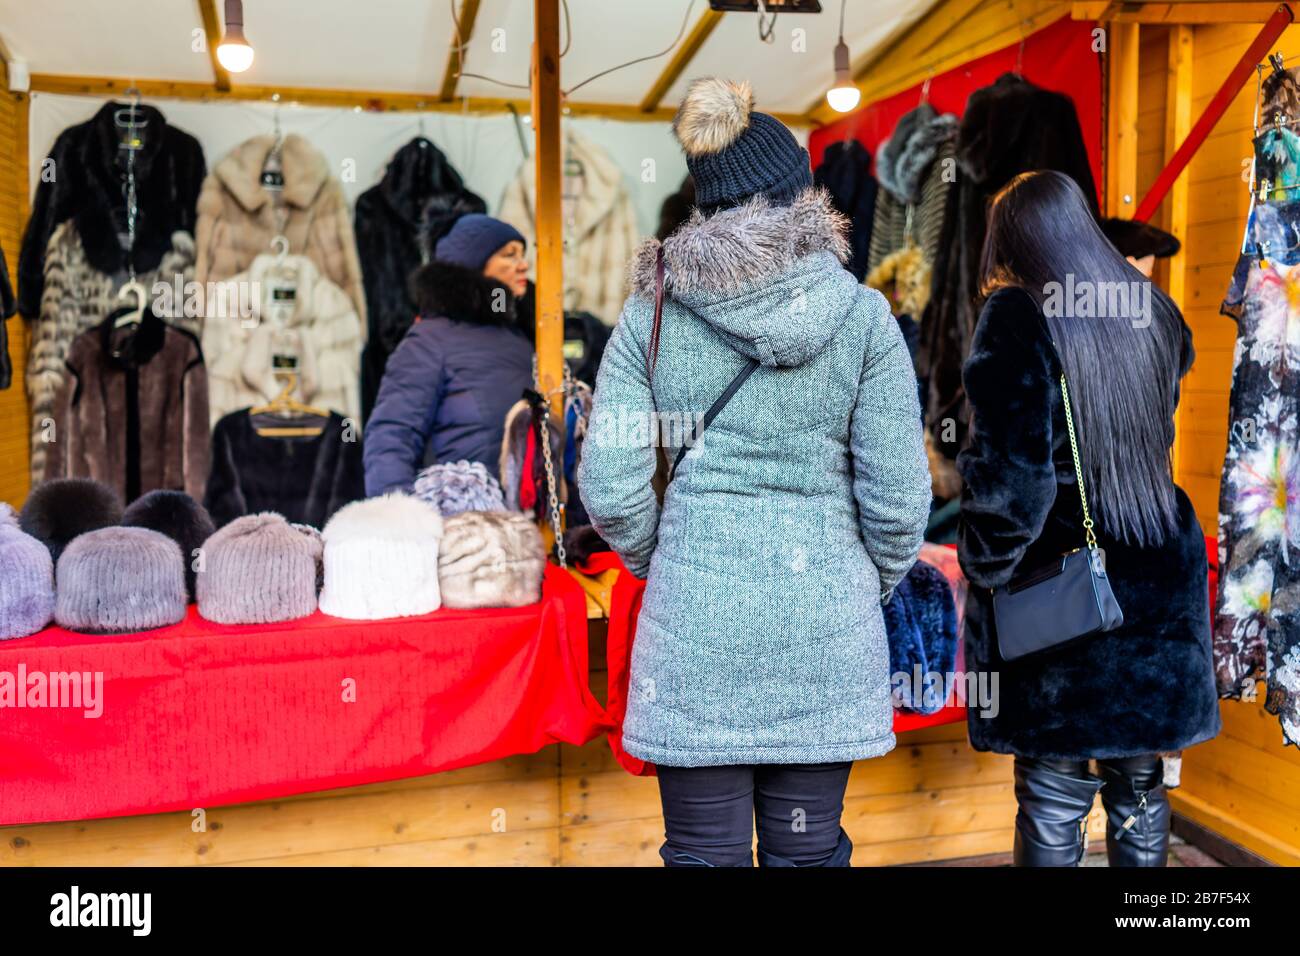 Warsaw, Poland - December 19, 2019: Christmas market in Warszawa old town with people women shopping at fur clothes vendor in winter selling coats hat Stock Photo